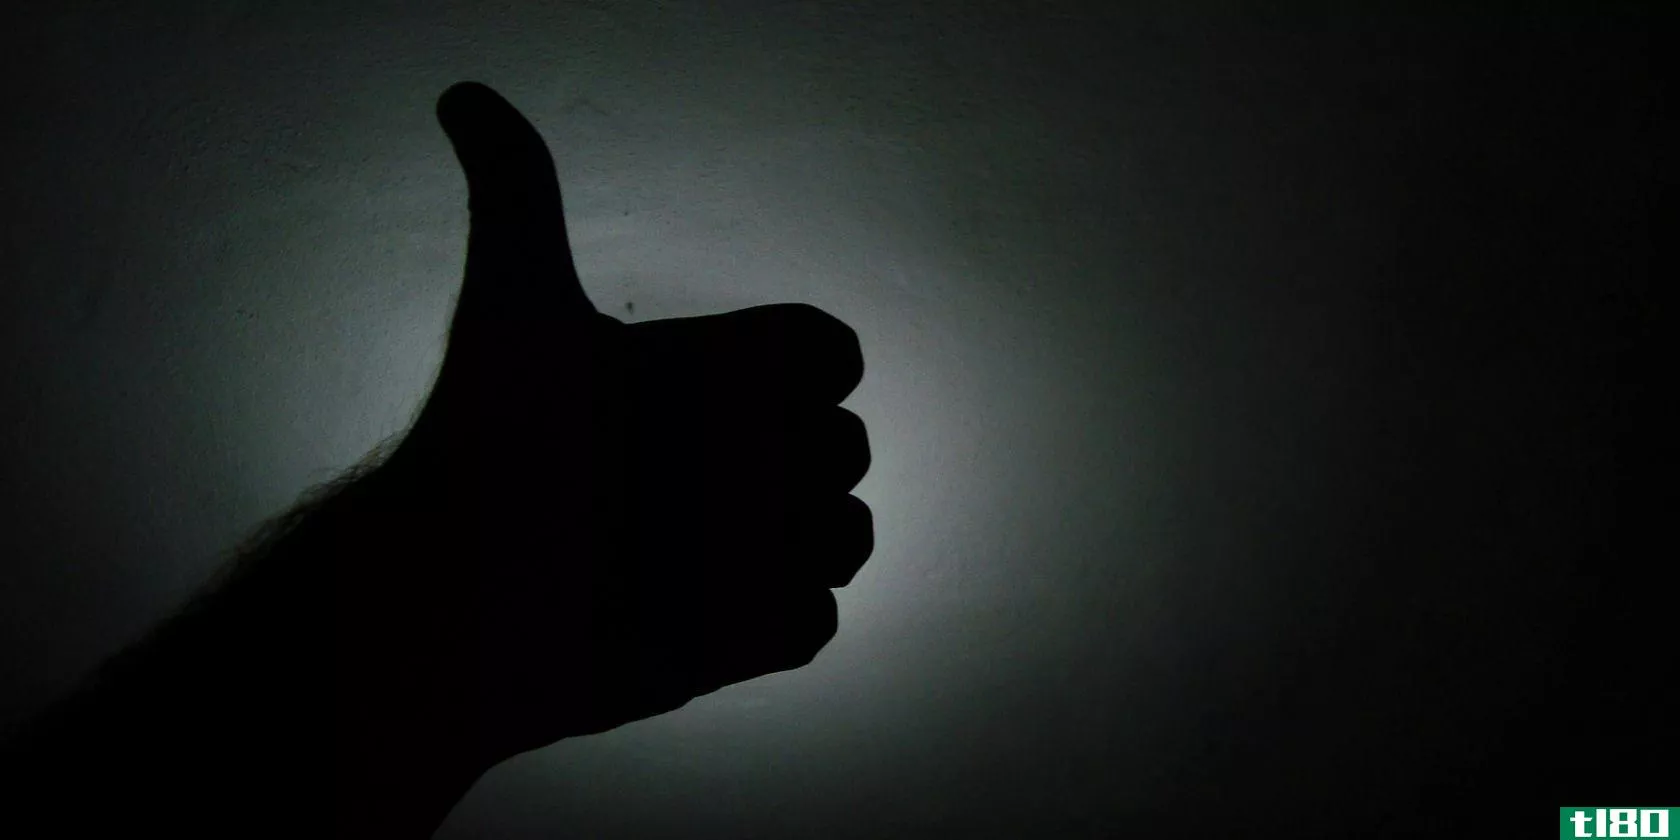 thumbs-up-silhouette